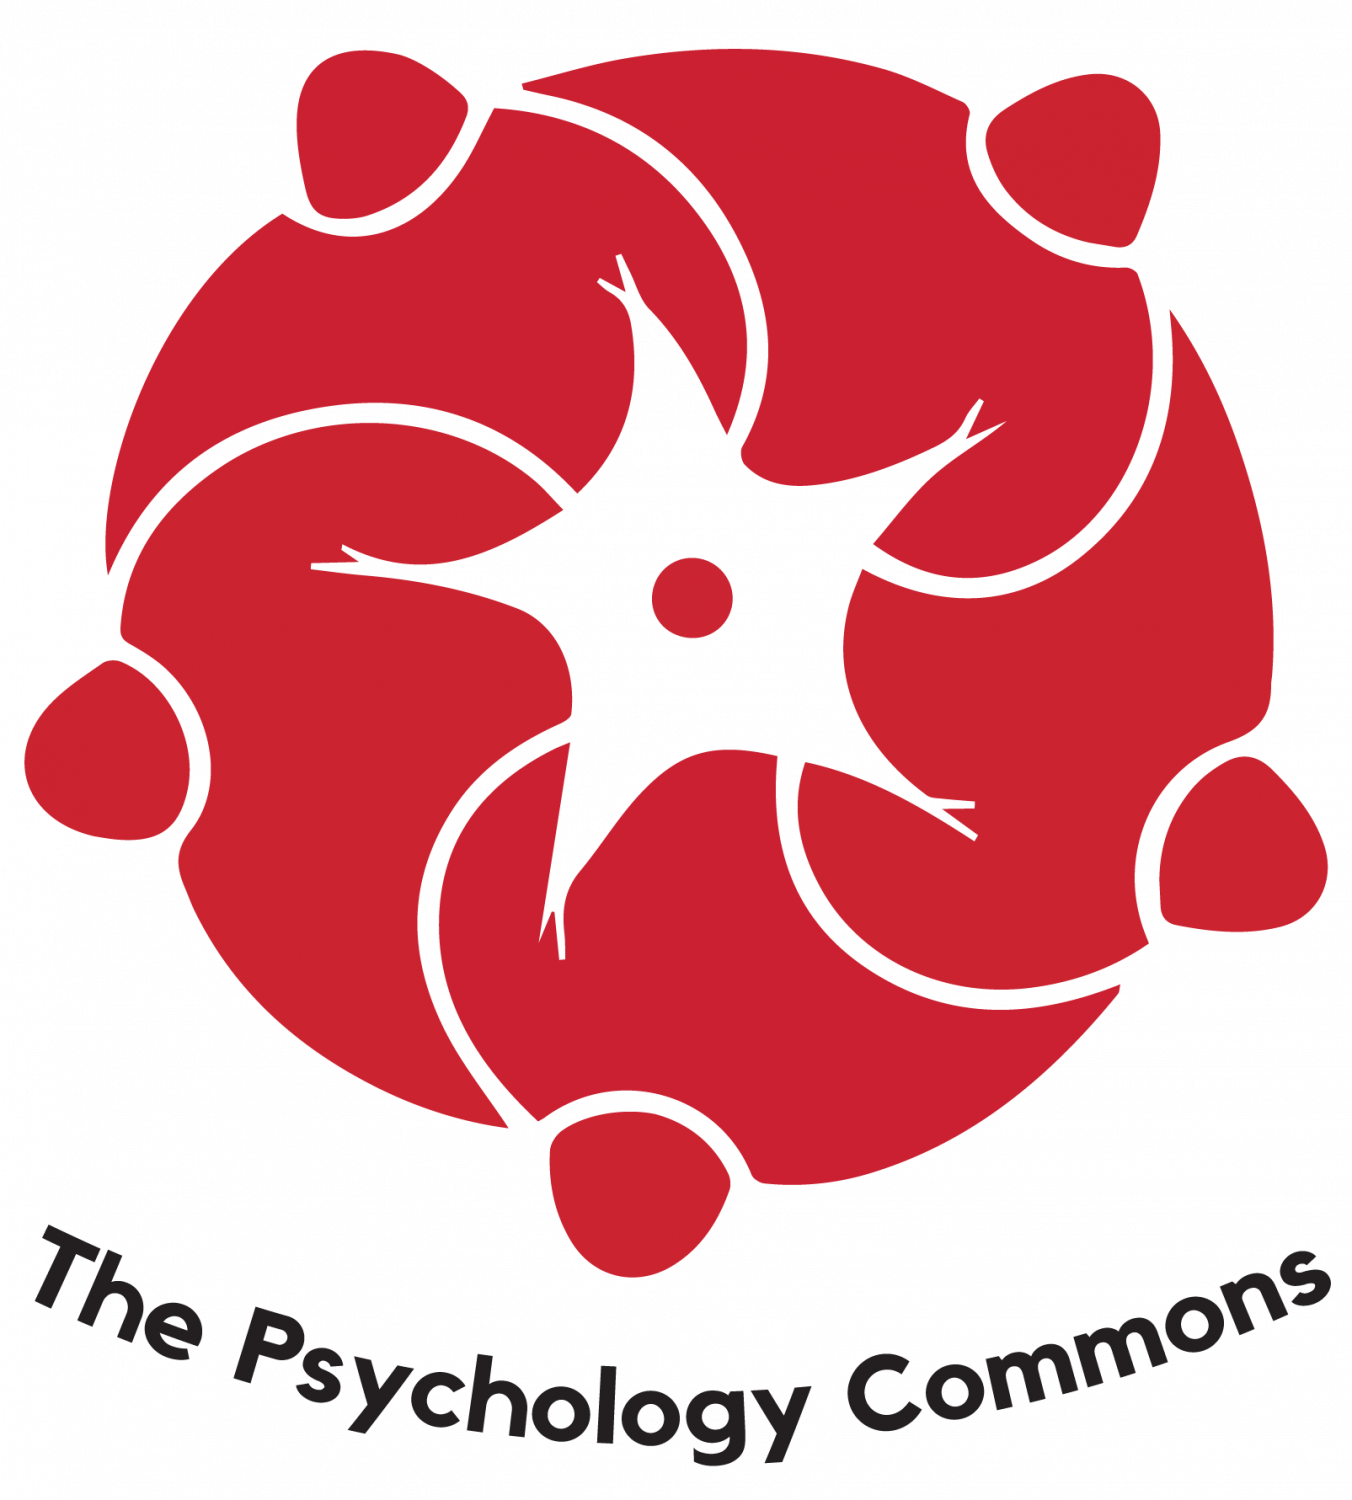 Cover image for The Psychology Commons